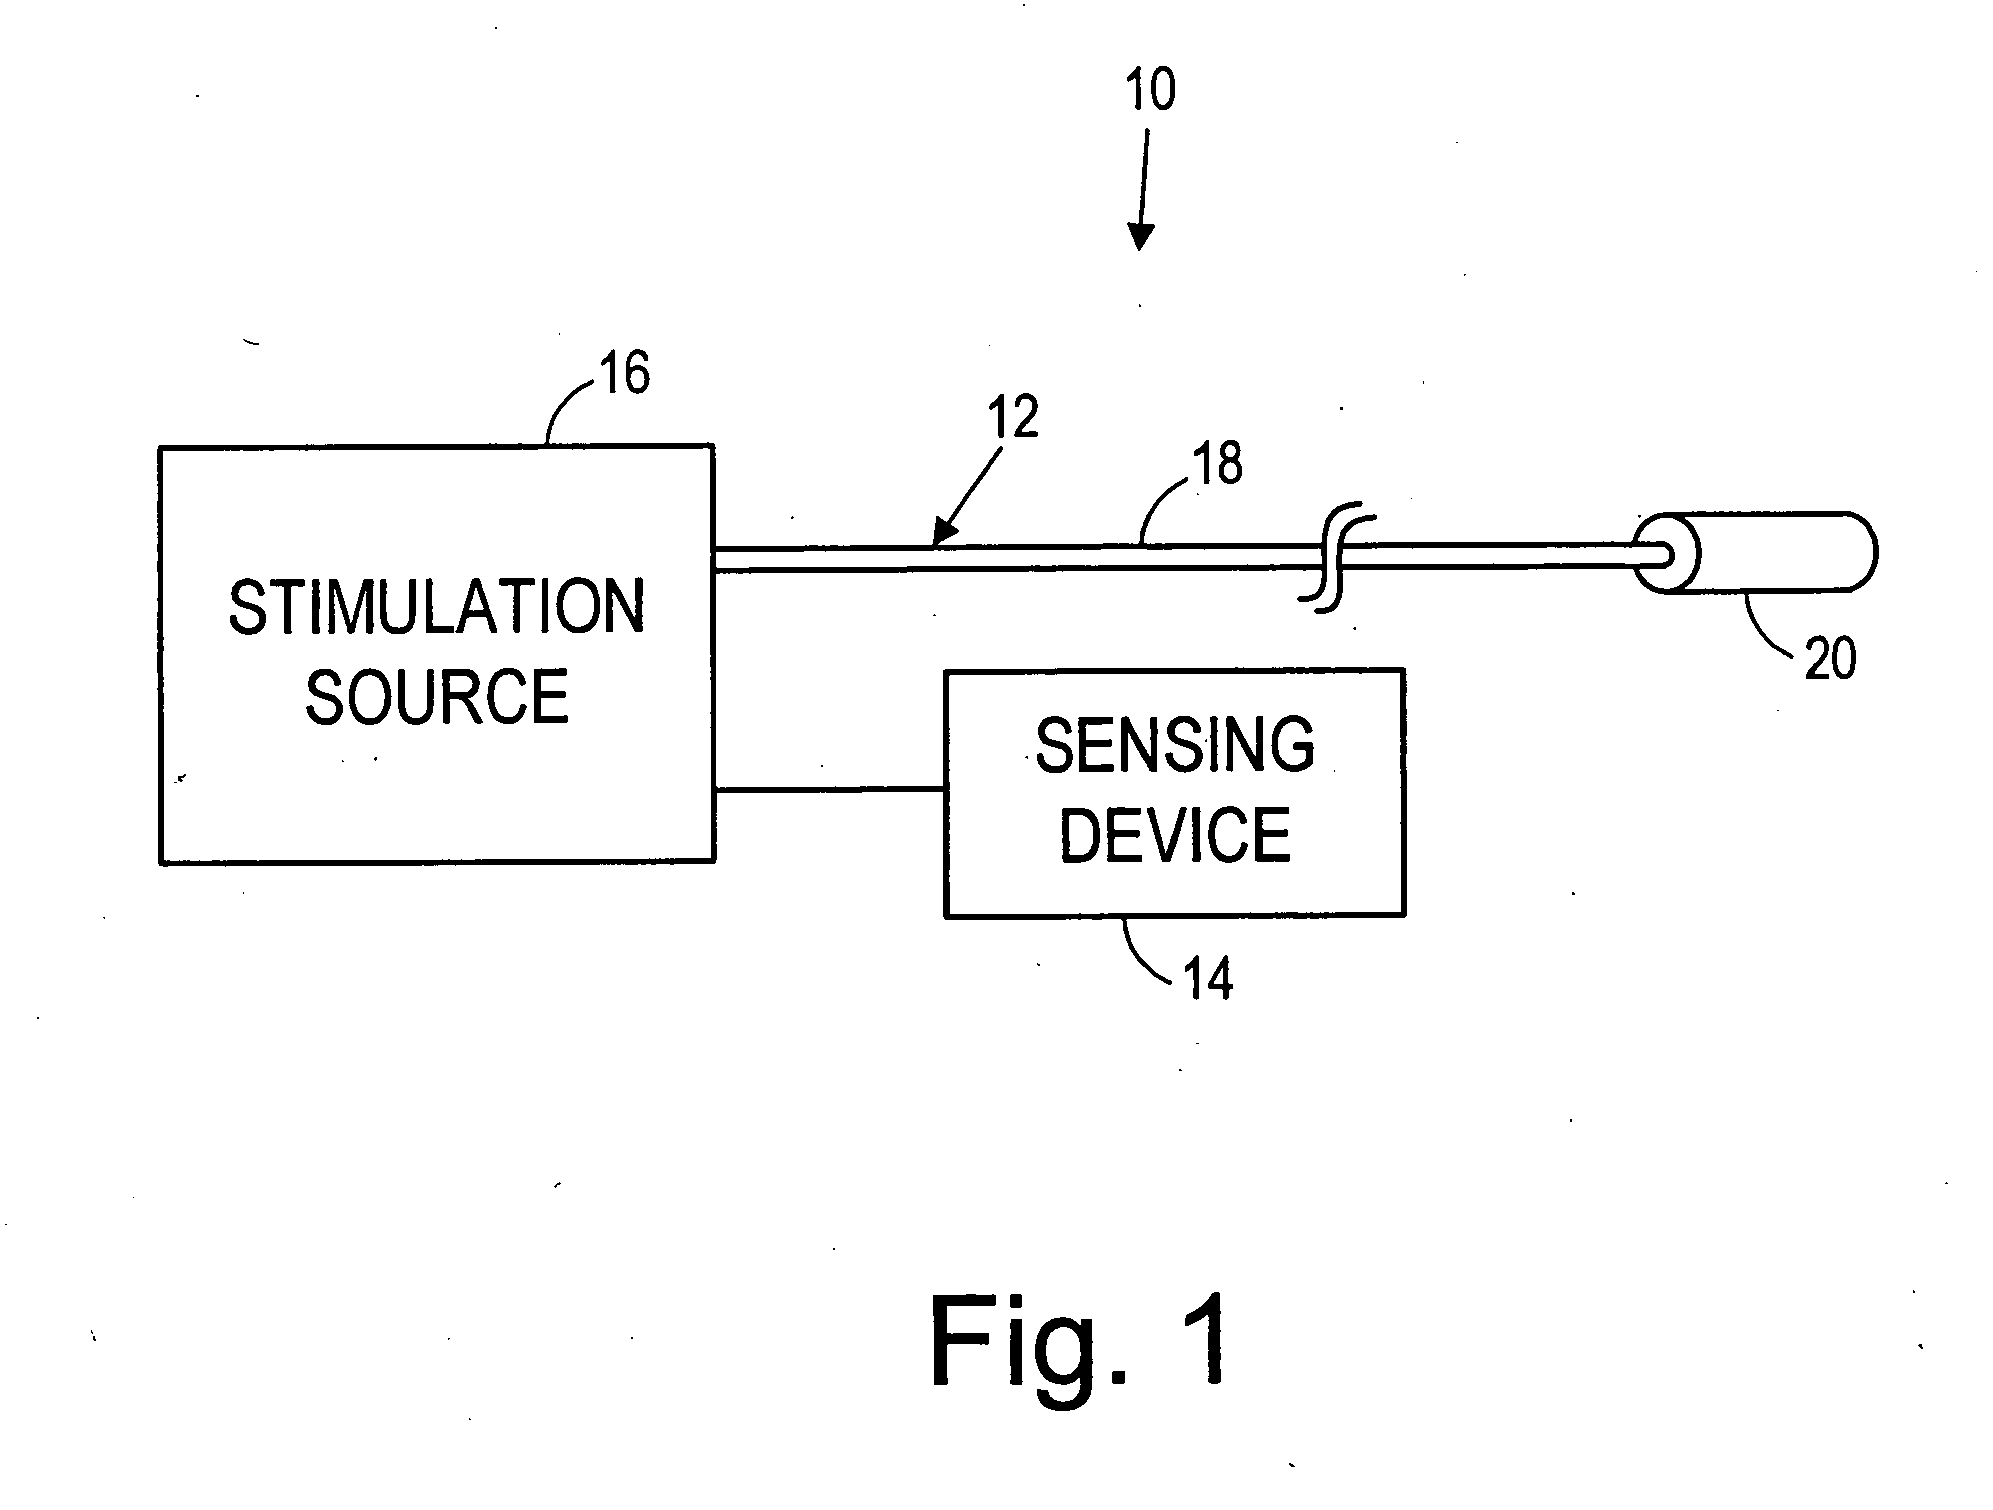 Method for stimulating neural tissue in response to a sensed physiological event